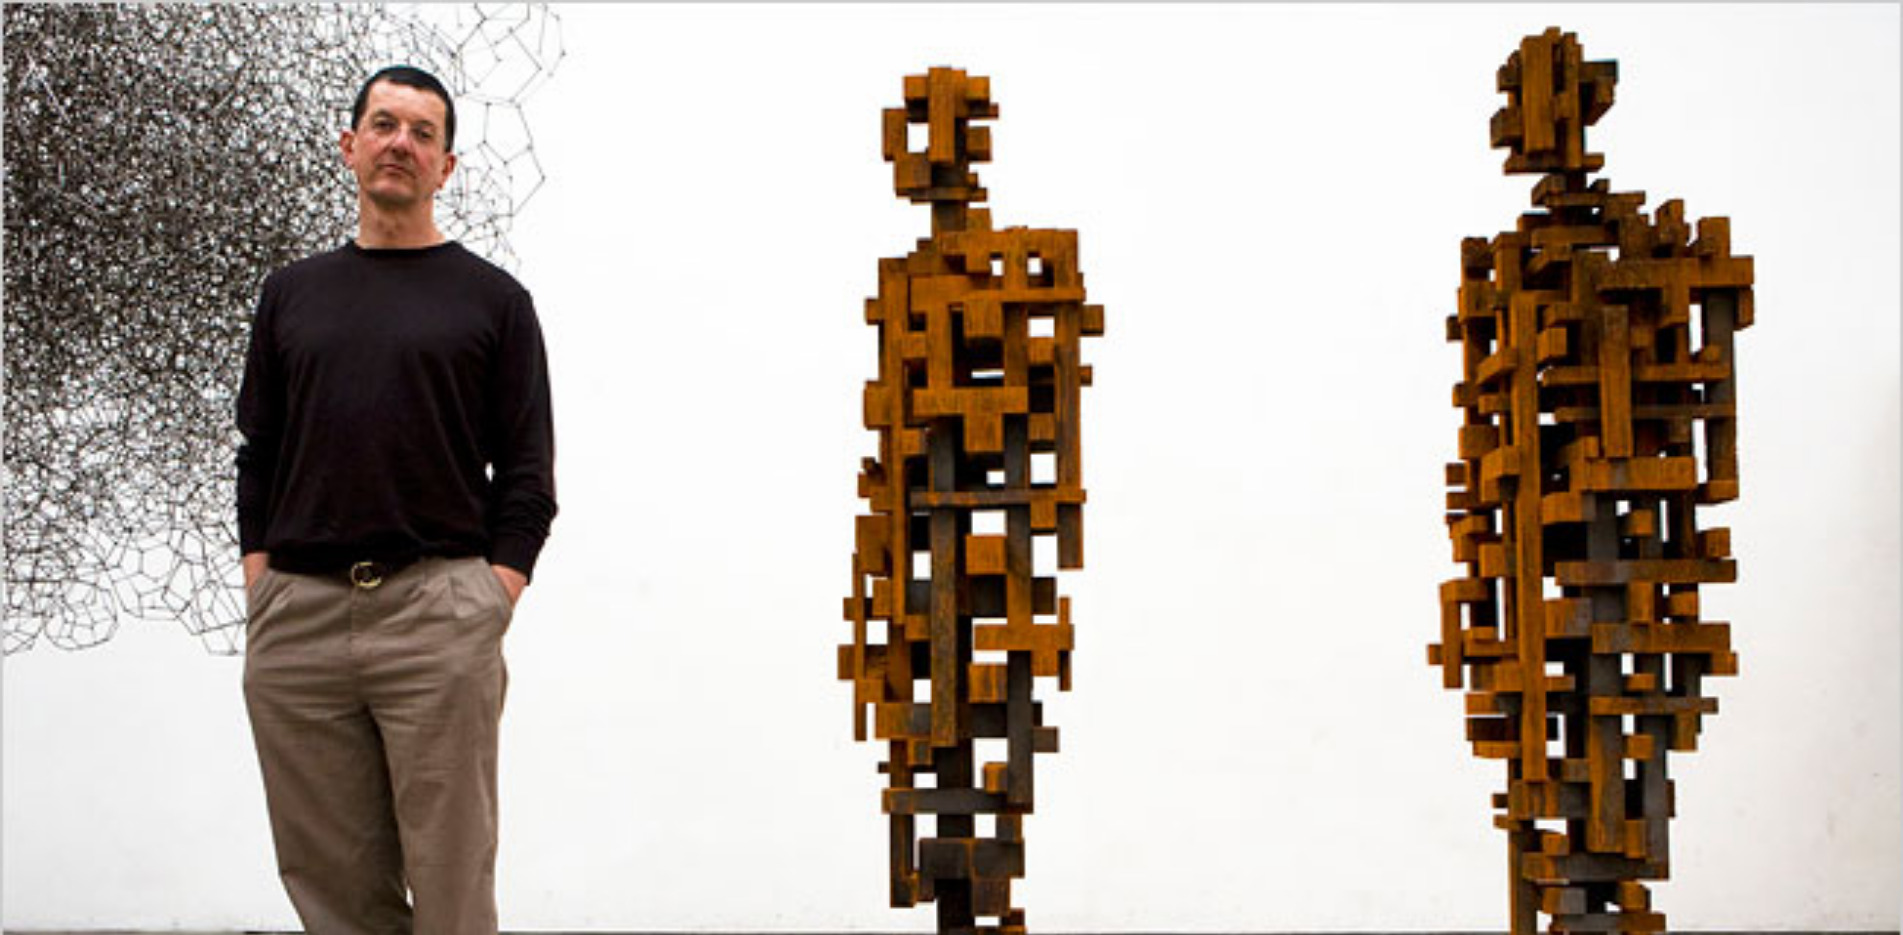  - TOP 10 LIVING SCULPTORS WHO ARE CHANGING THE COURSE OF THE ART WORLD TODAY